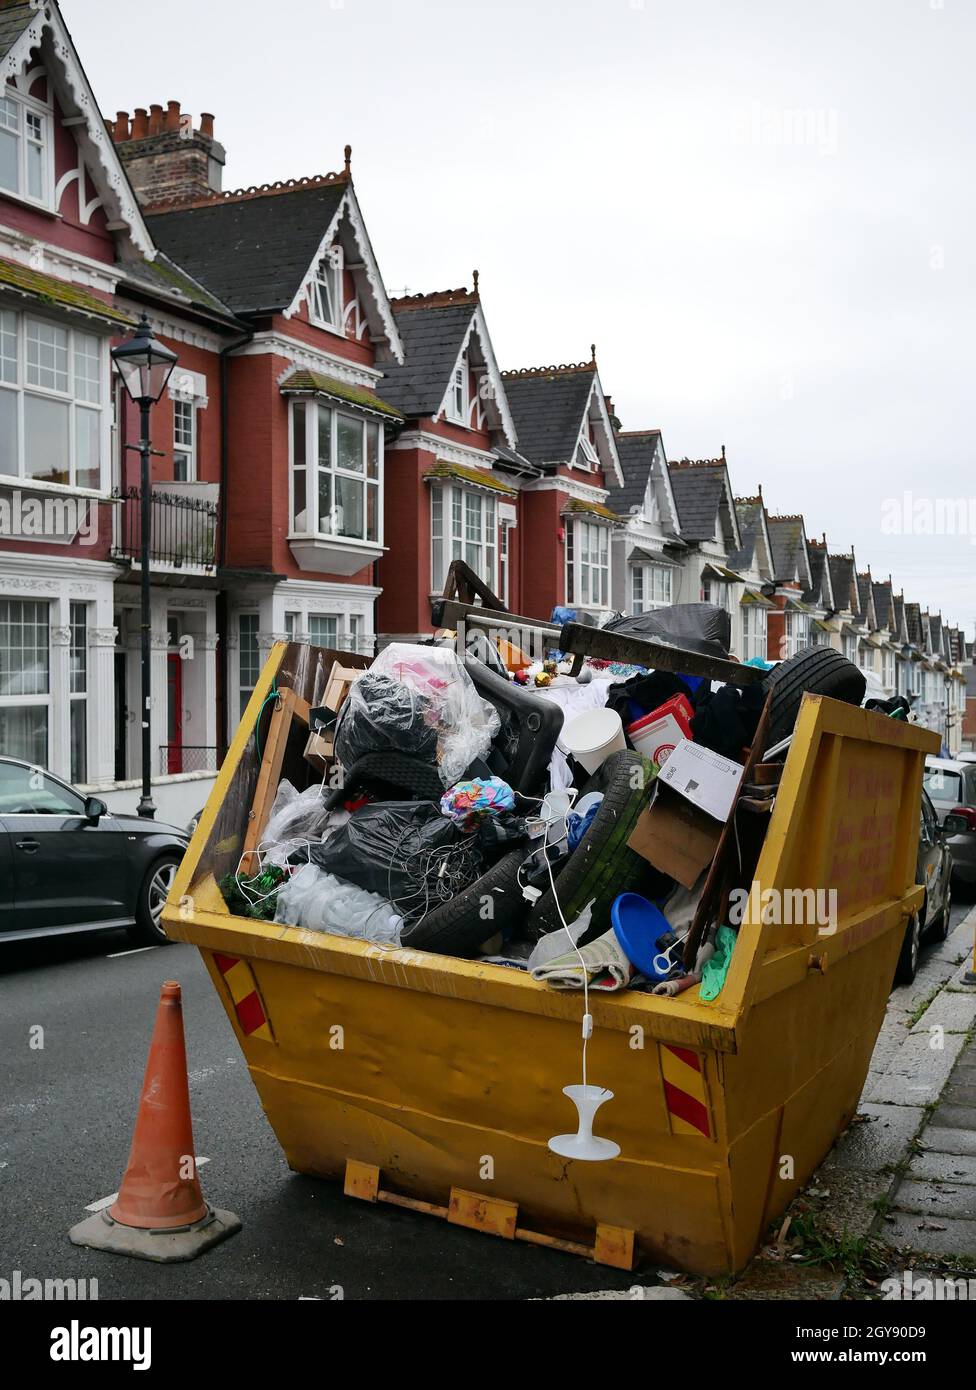 Skip full of rubbish and waste on a residential street. Stock Photo